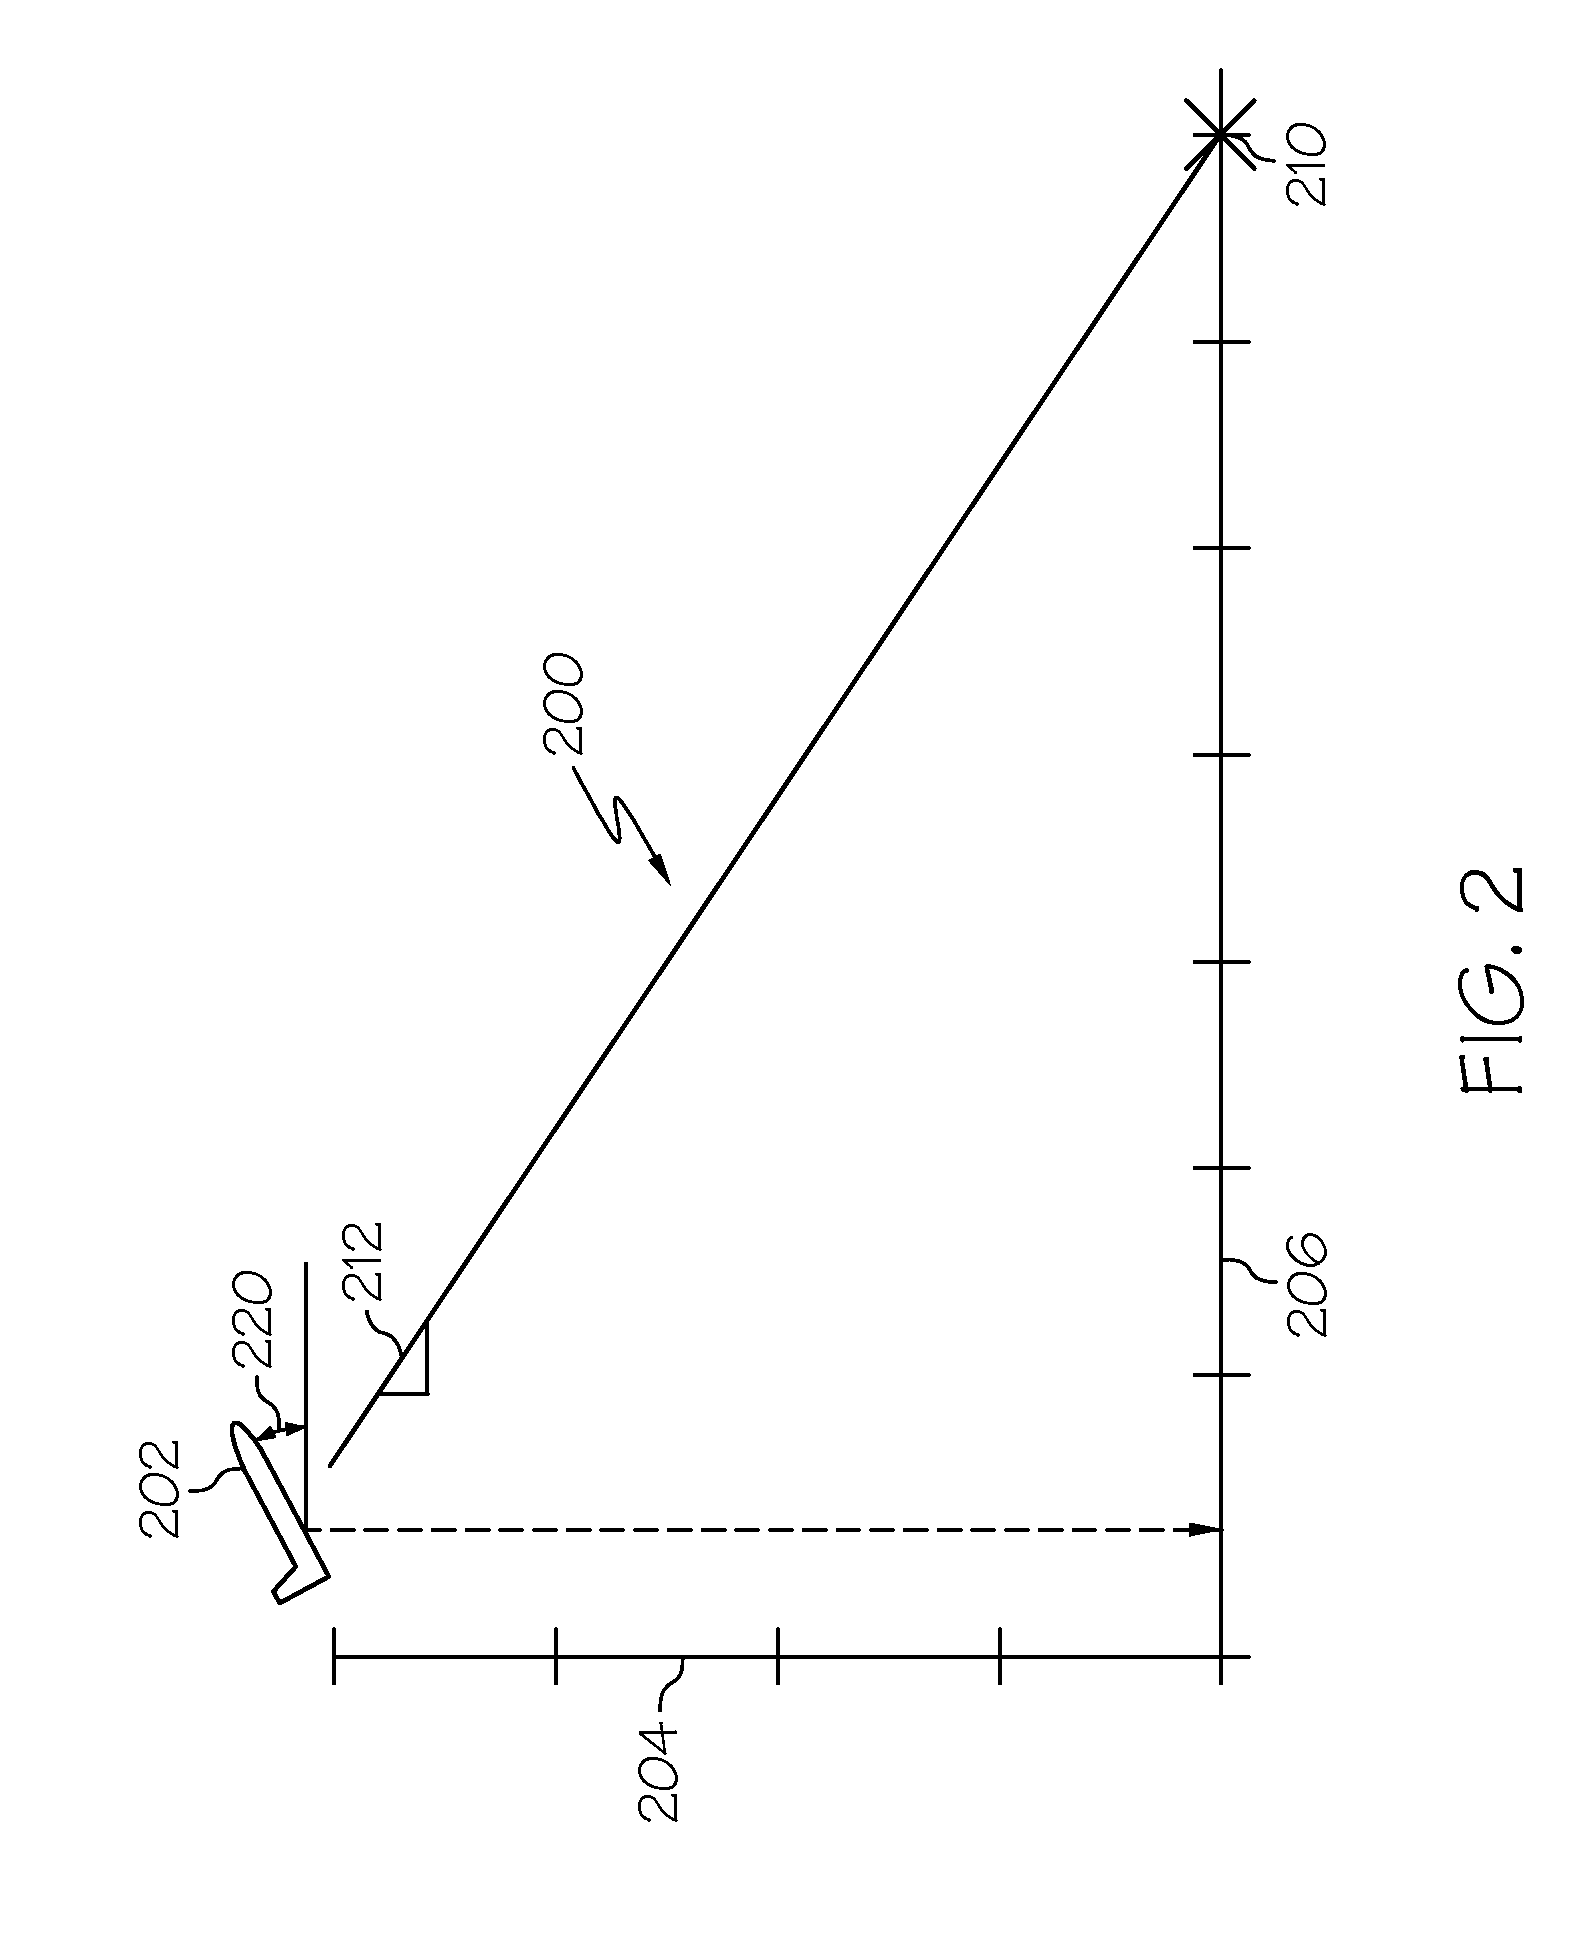 Systems and methods for controlling the speed of an aircraft